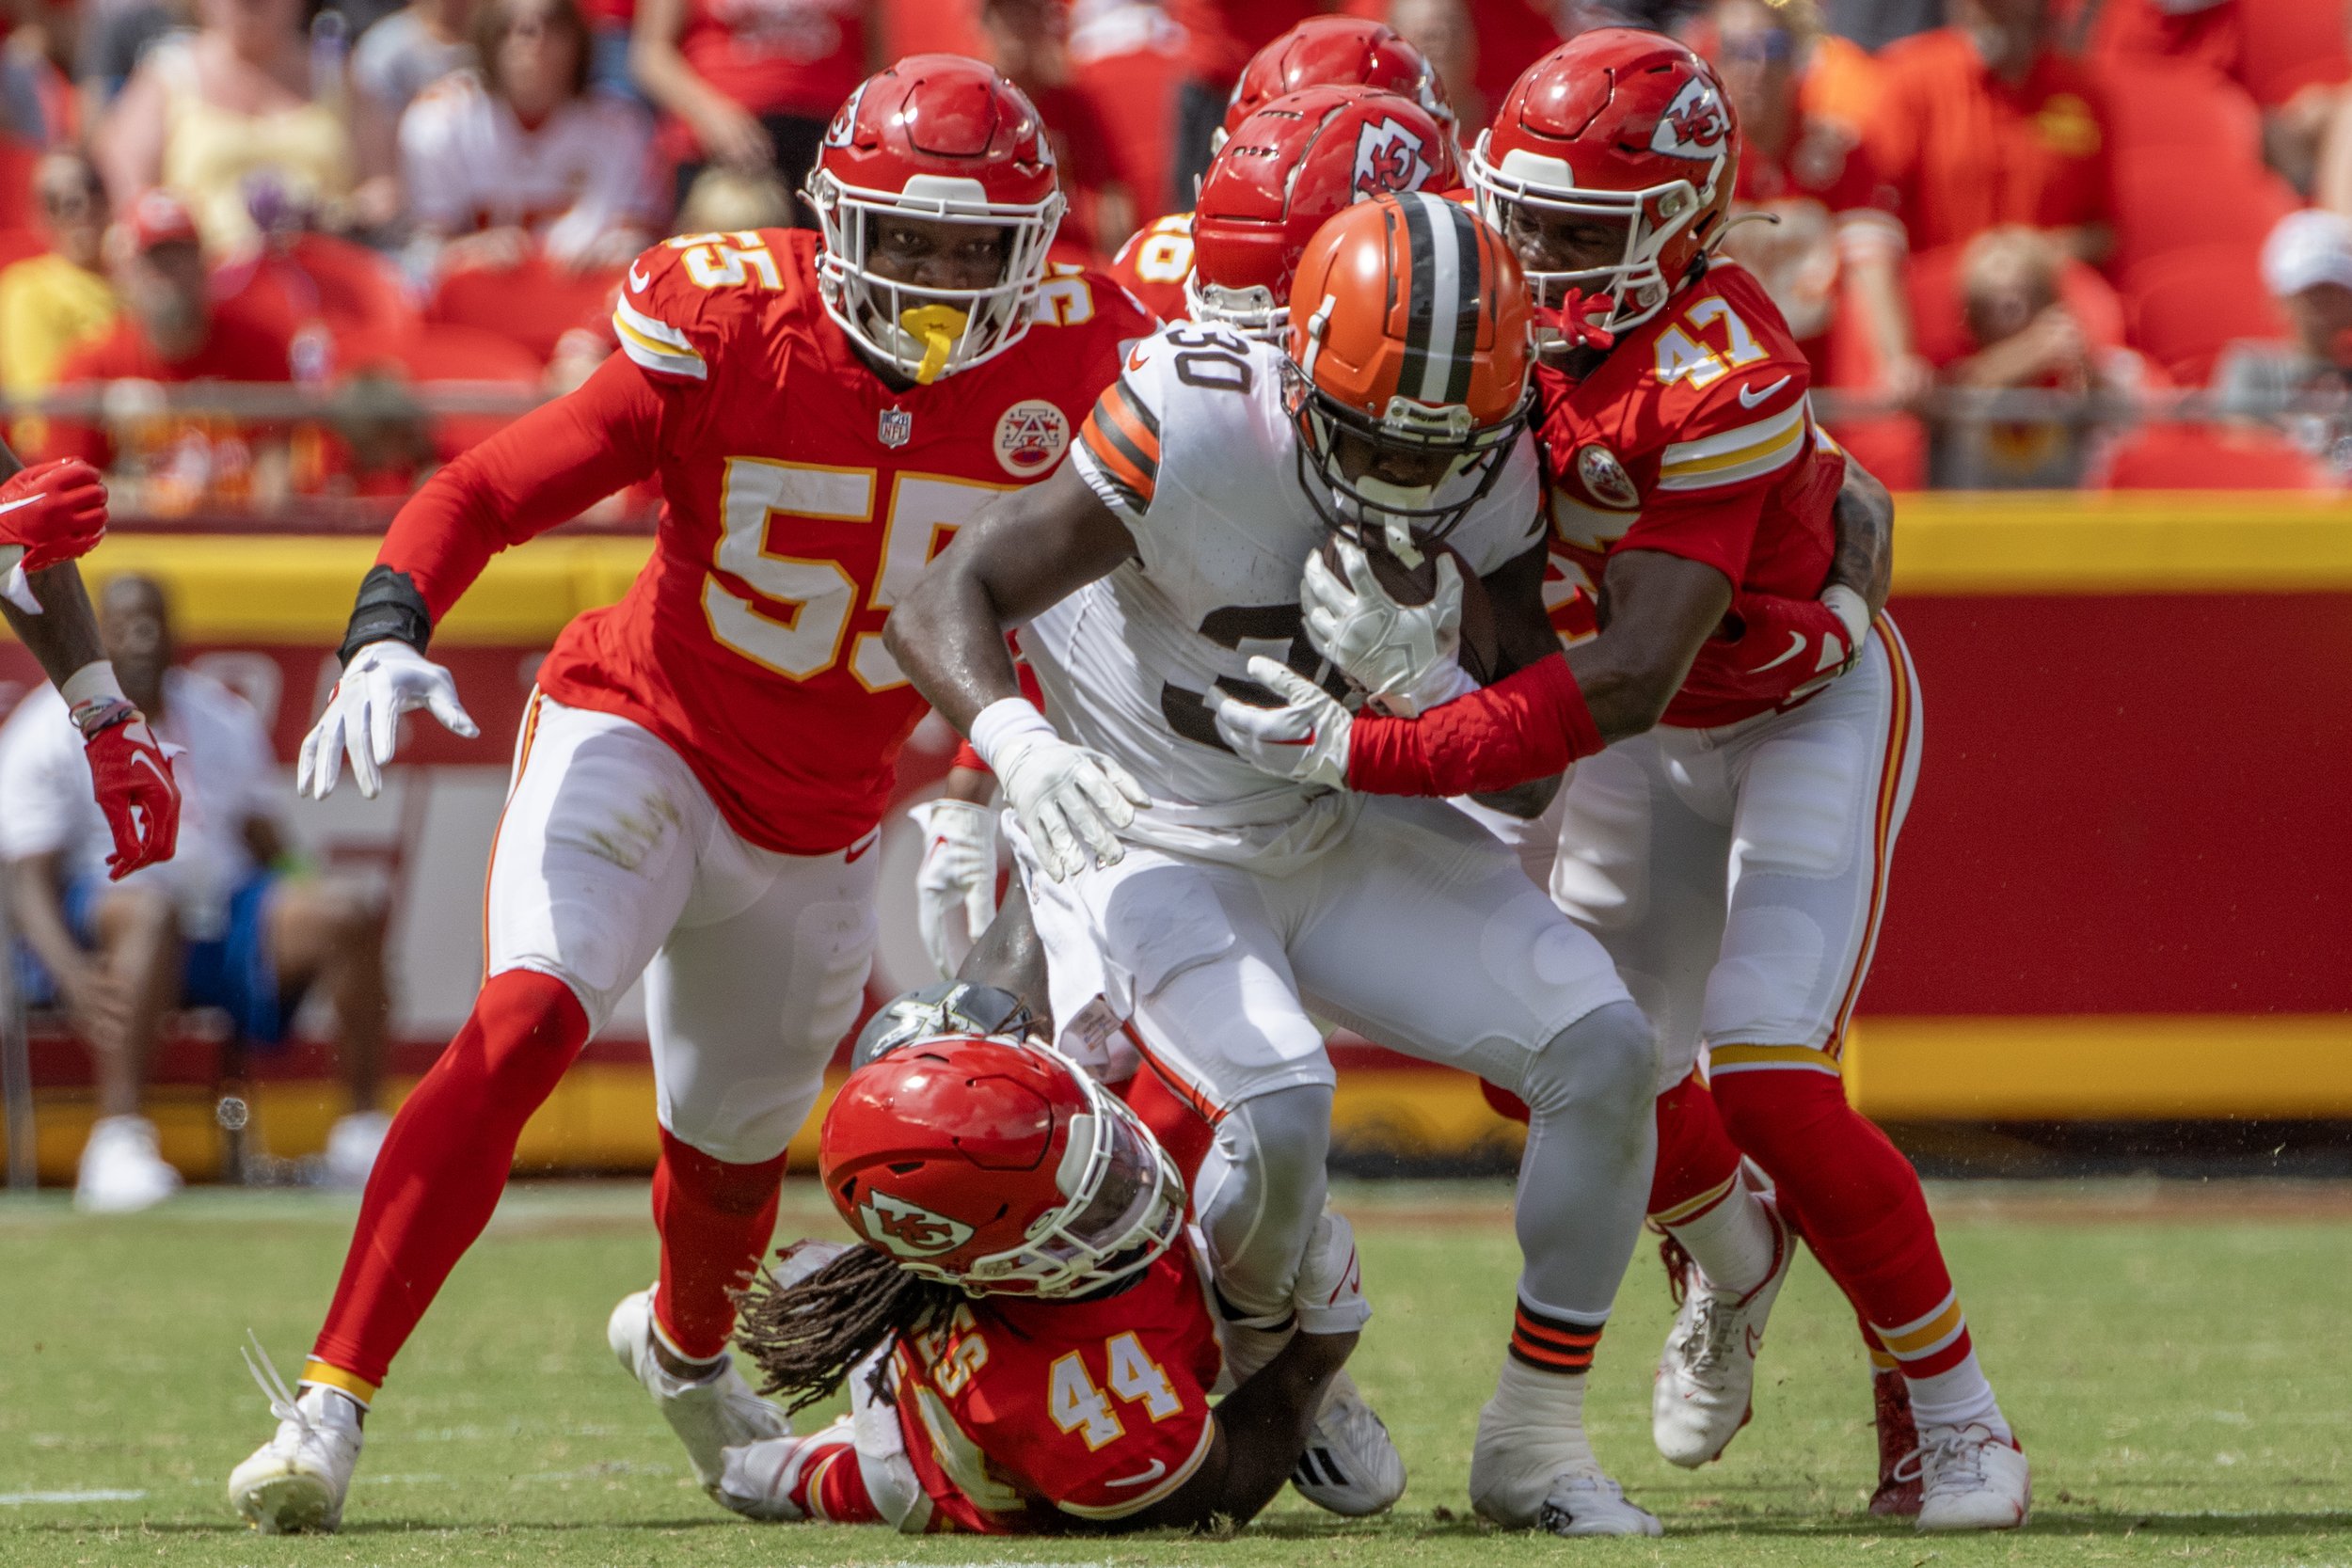  Kansas City Chiefs linebacker Cam Jones (44) and Kansas City Chiefs safety Anthony Cook (47) tackle Cleveland Browns safety Nate Meadors (30) in the fourth quarter during an NFL preseason game at GEHA Field at Arrowhead Stadium on Saturday, Aug. 26,